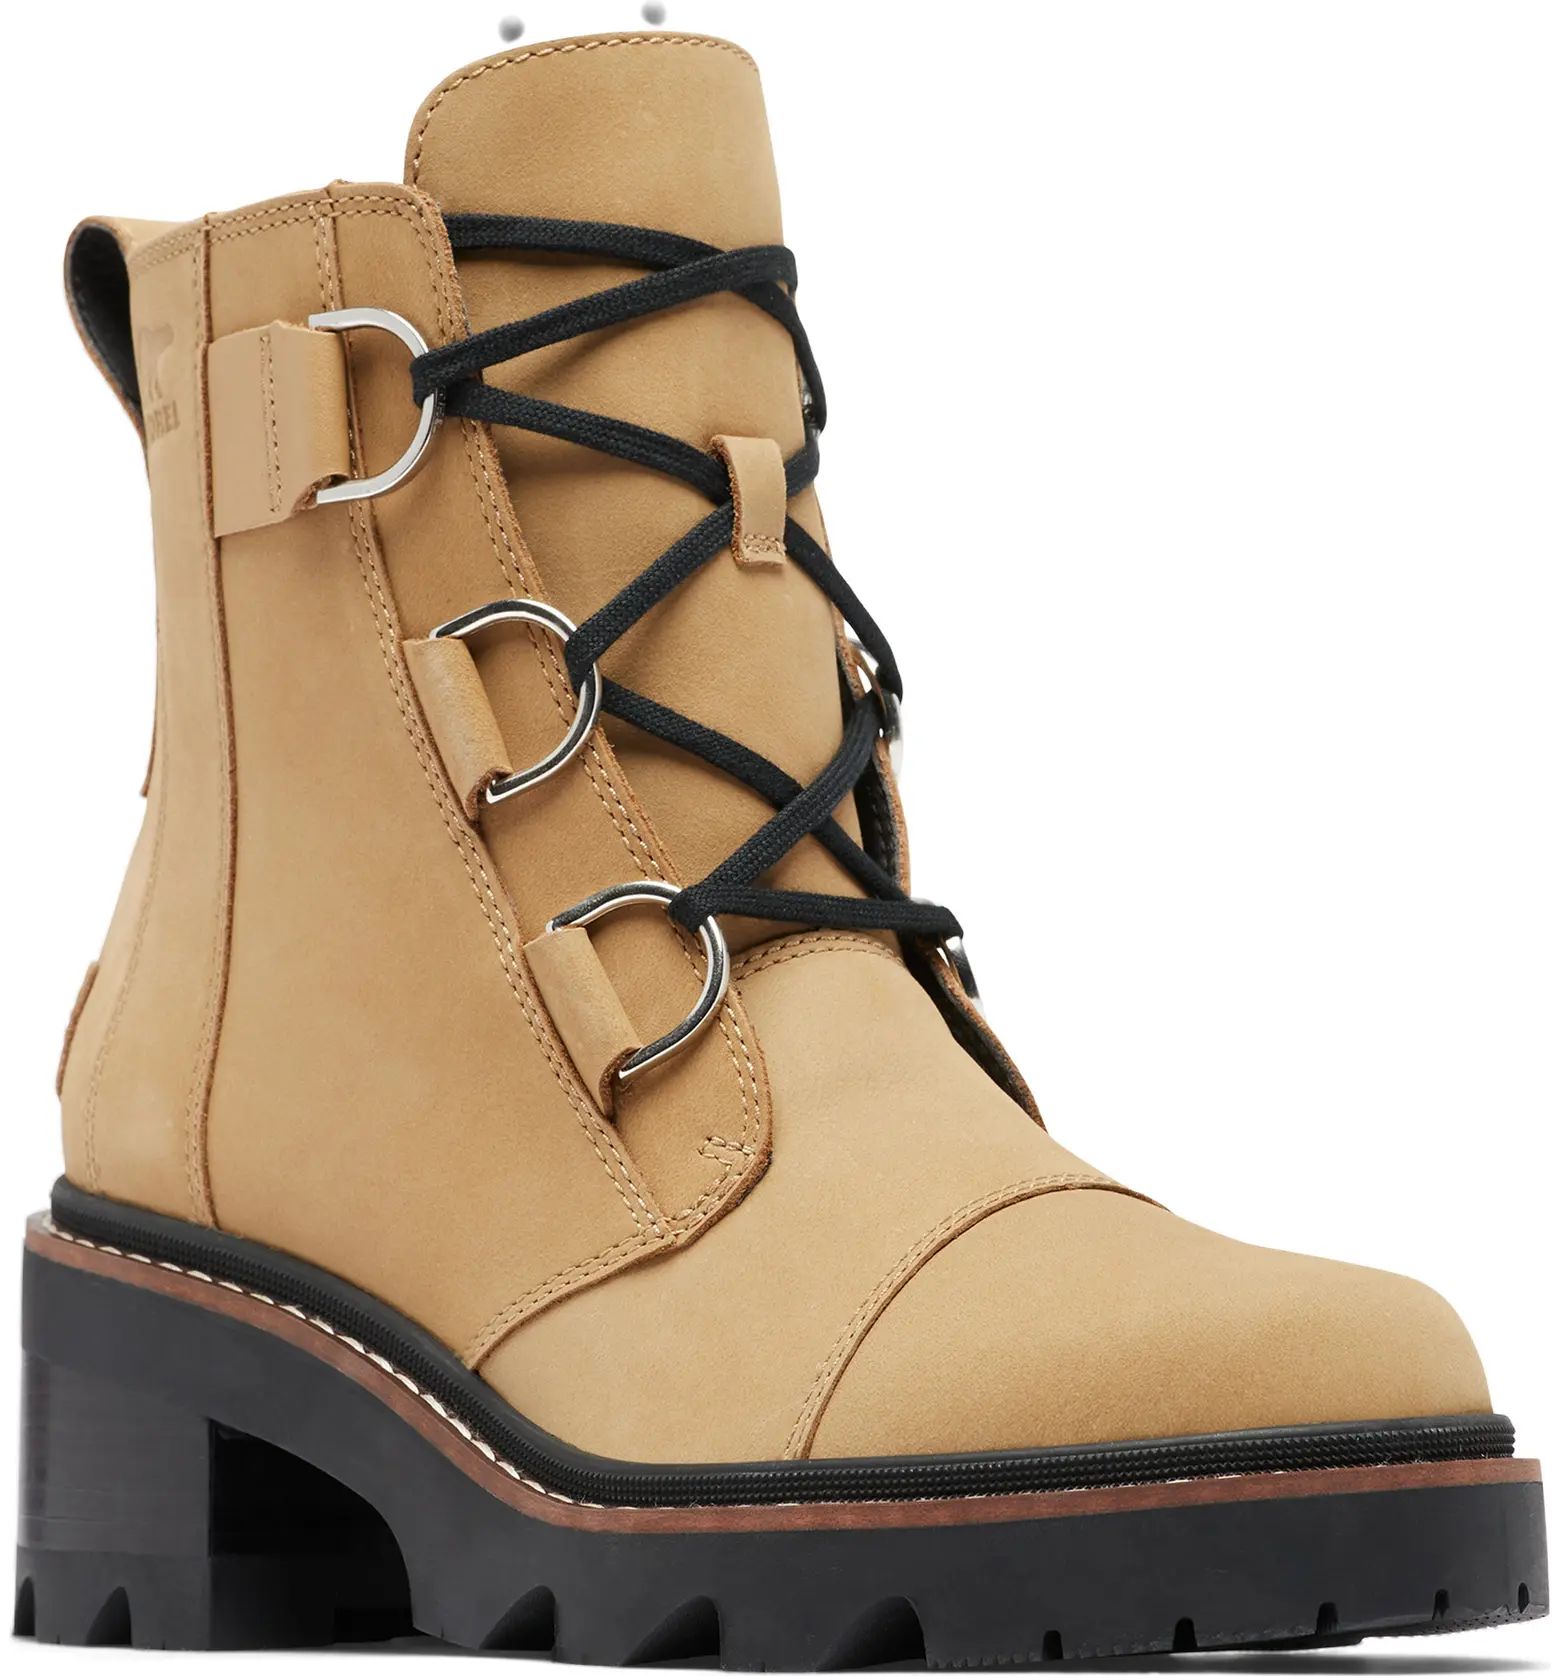 Joan Now Lace-Up Boot (Women) | Nordstrom